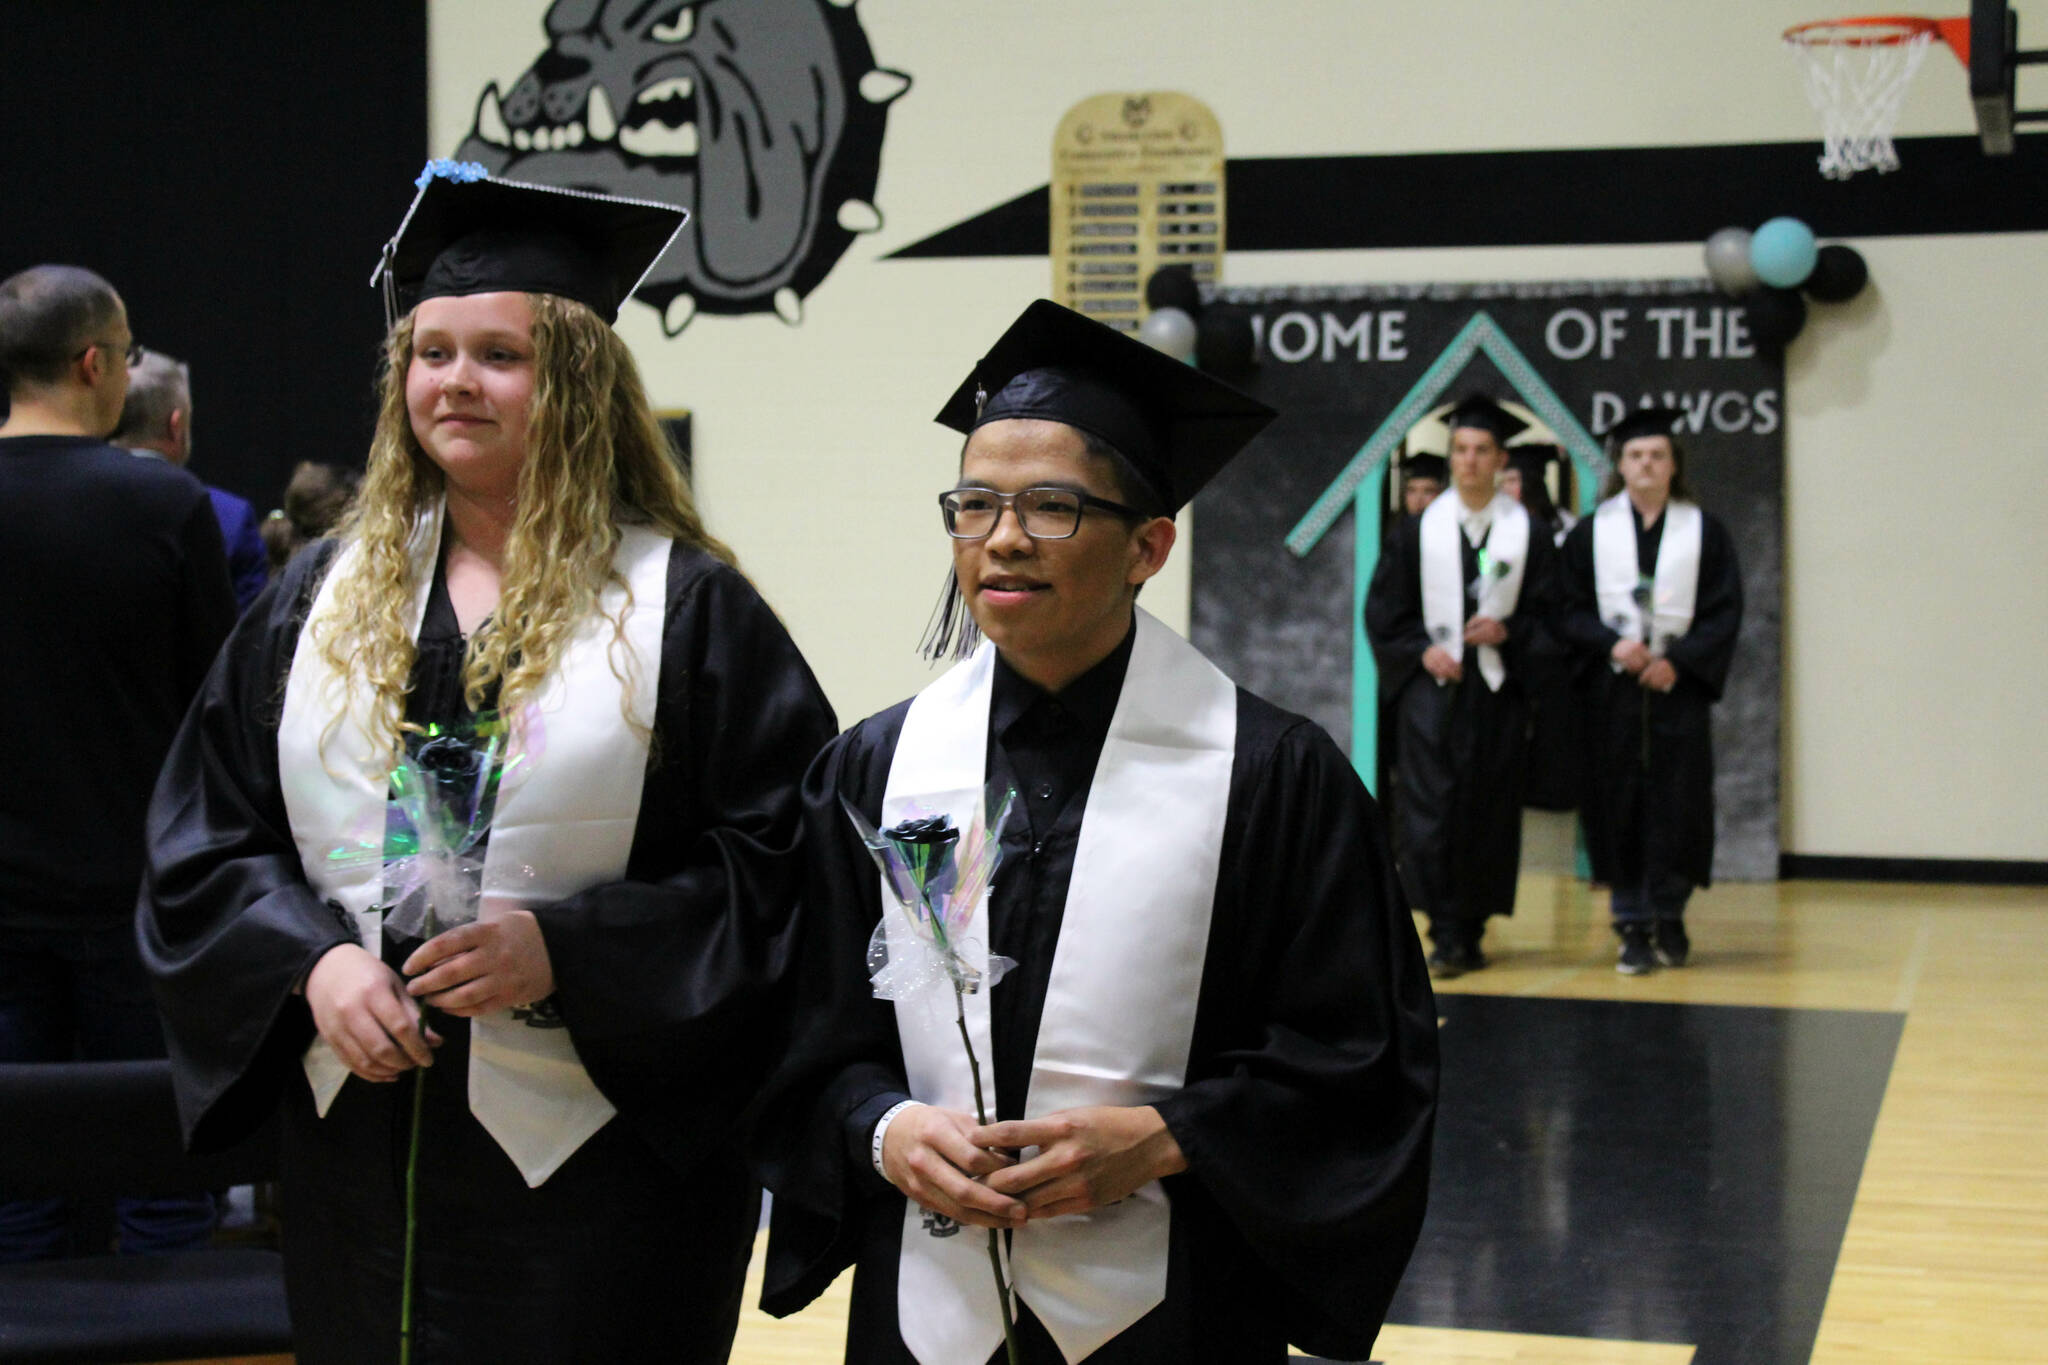 Nikiski Middle/High School graduates Shelby O’Brien (left) and Nathan Bourdukofsky (right) file into the gymnasium during their graduation ceremony on Tuesday, May 16, 2023, in Nikiski, Alaska. (Ashlyn O’Hara/Peninsula Clarion)